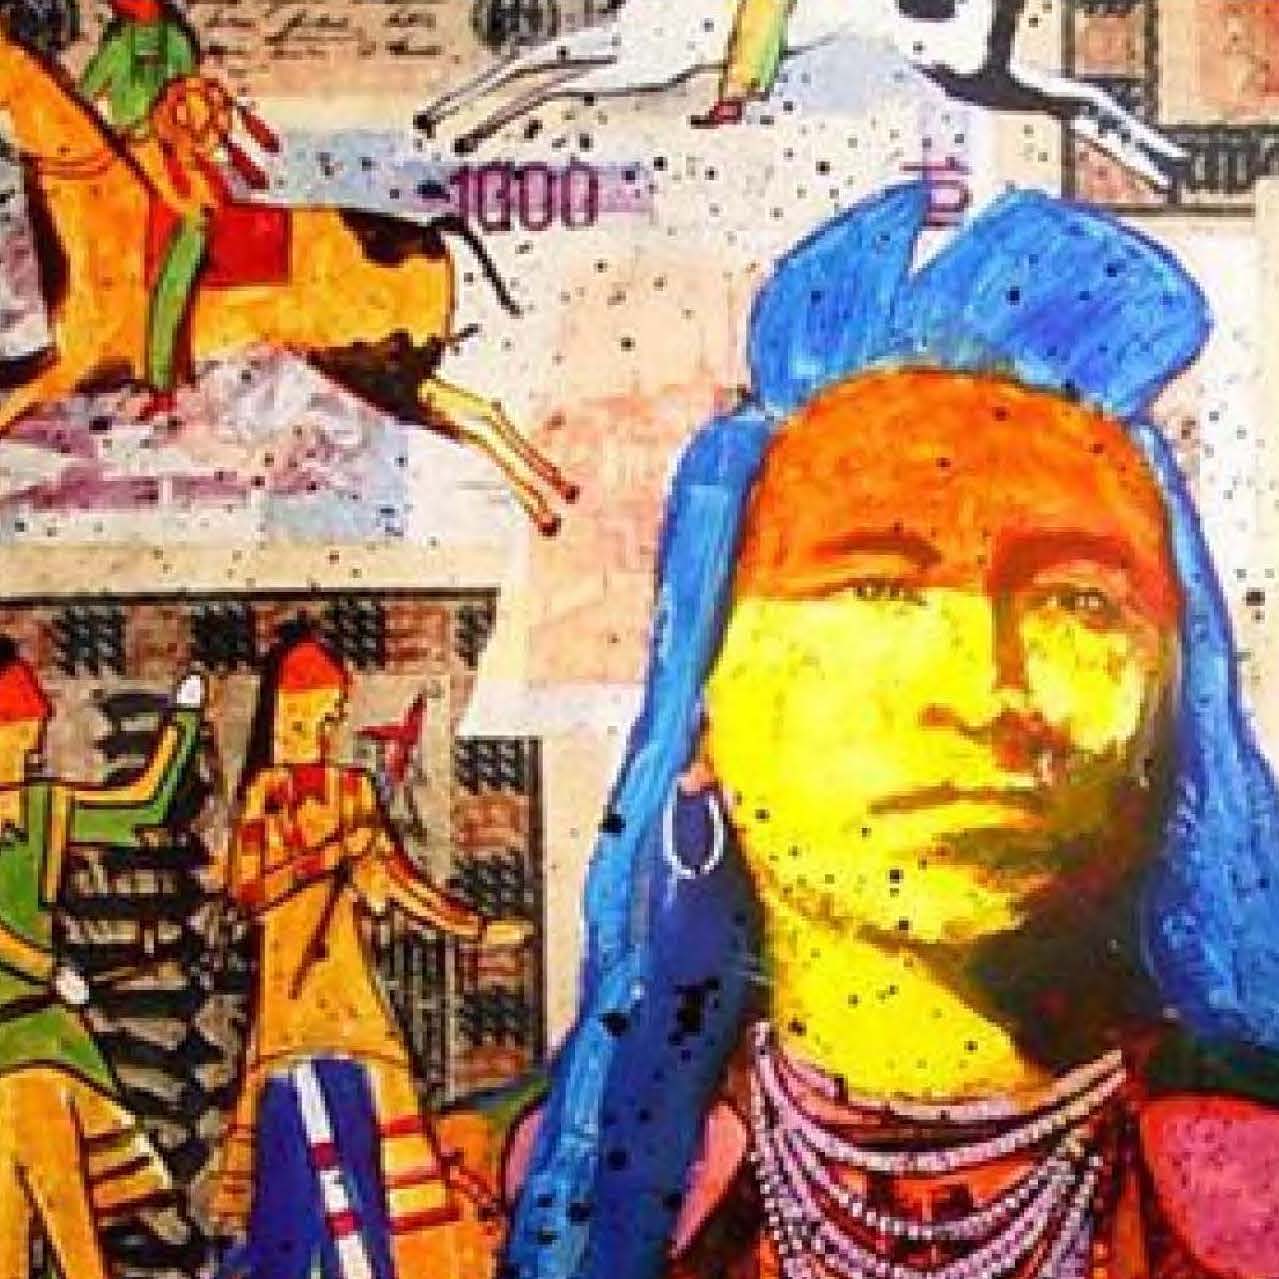 Many Faces of Native America Art Show on Display